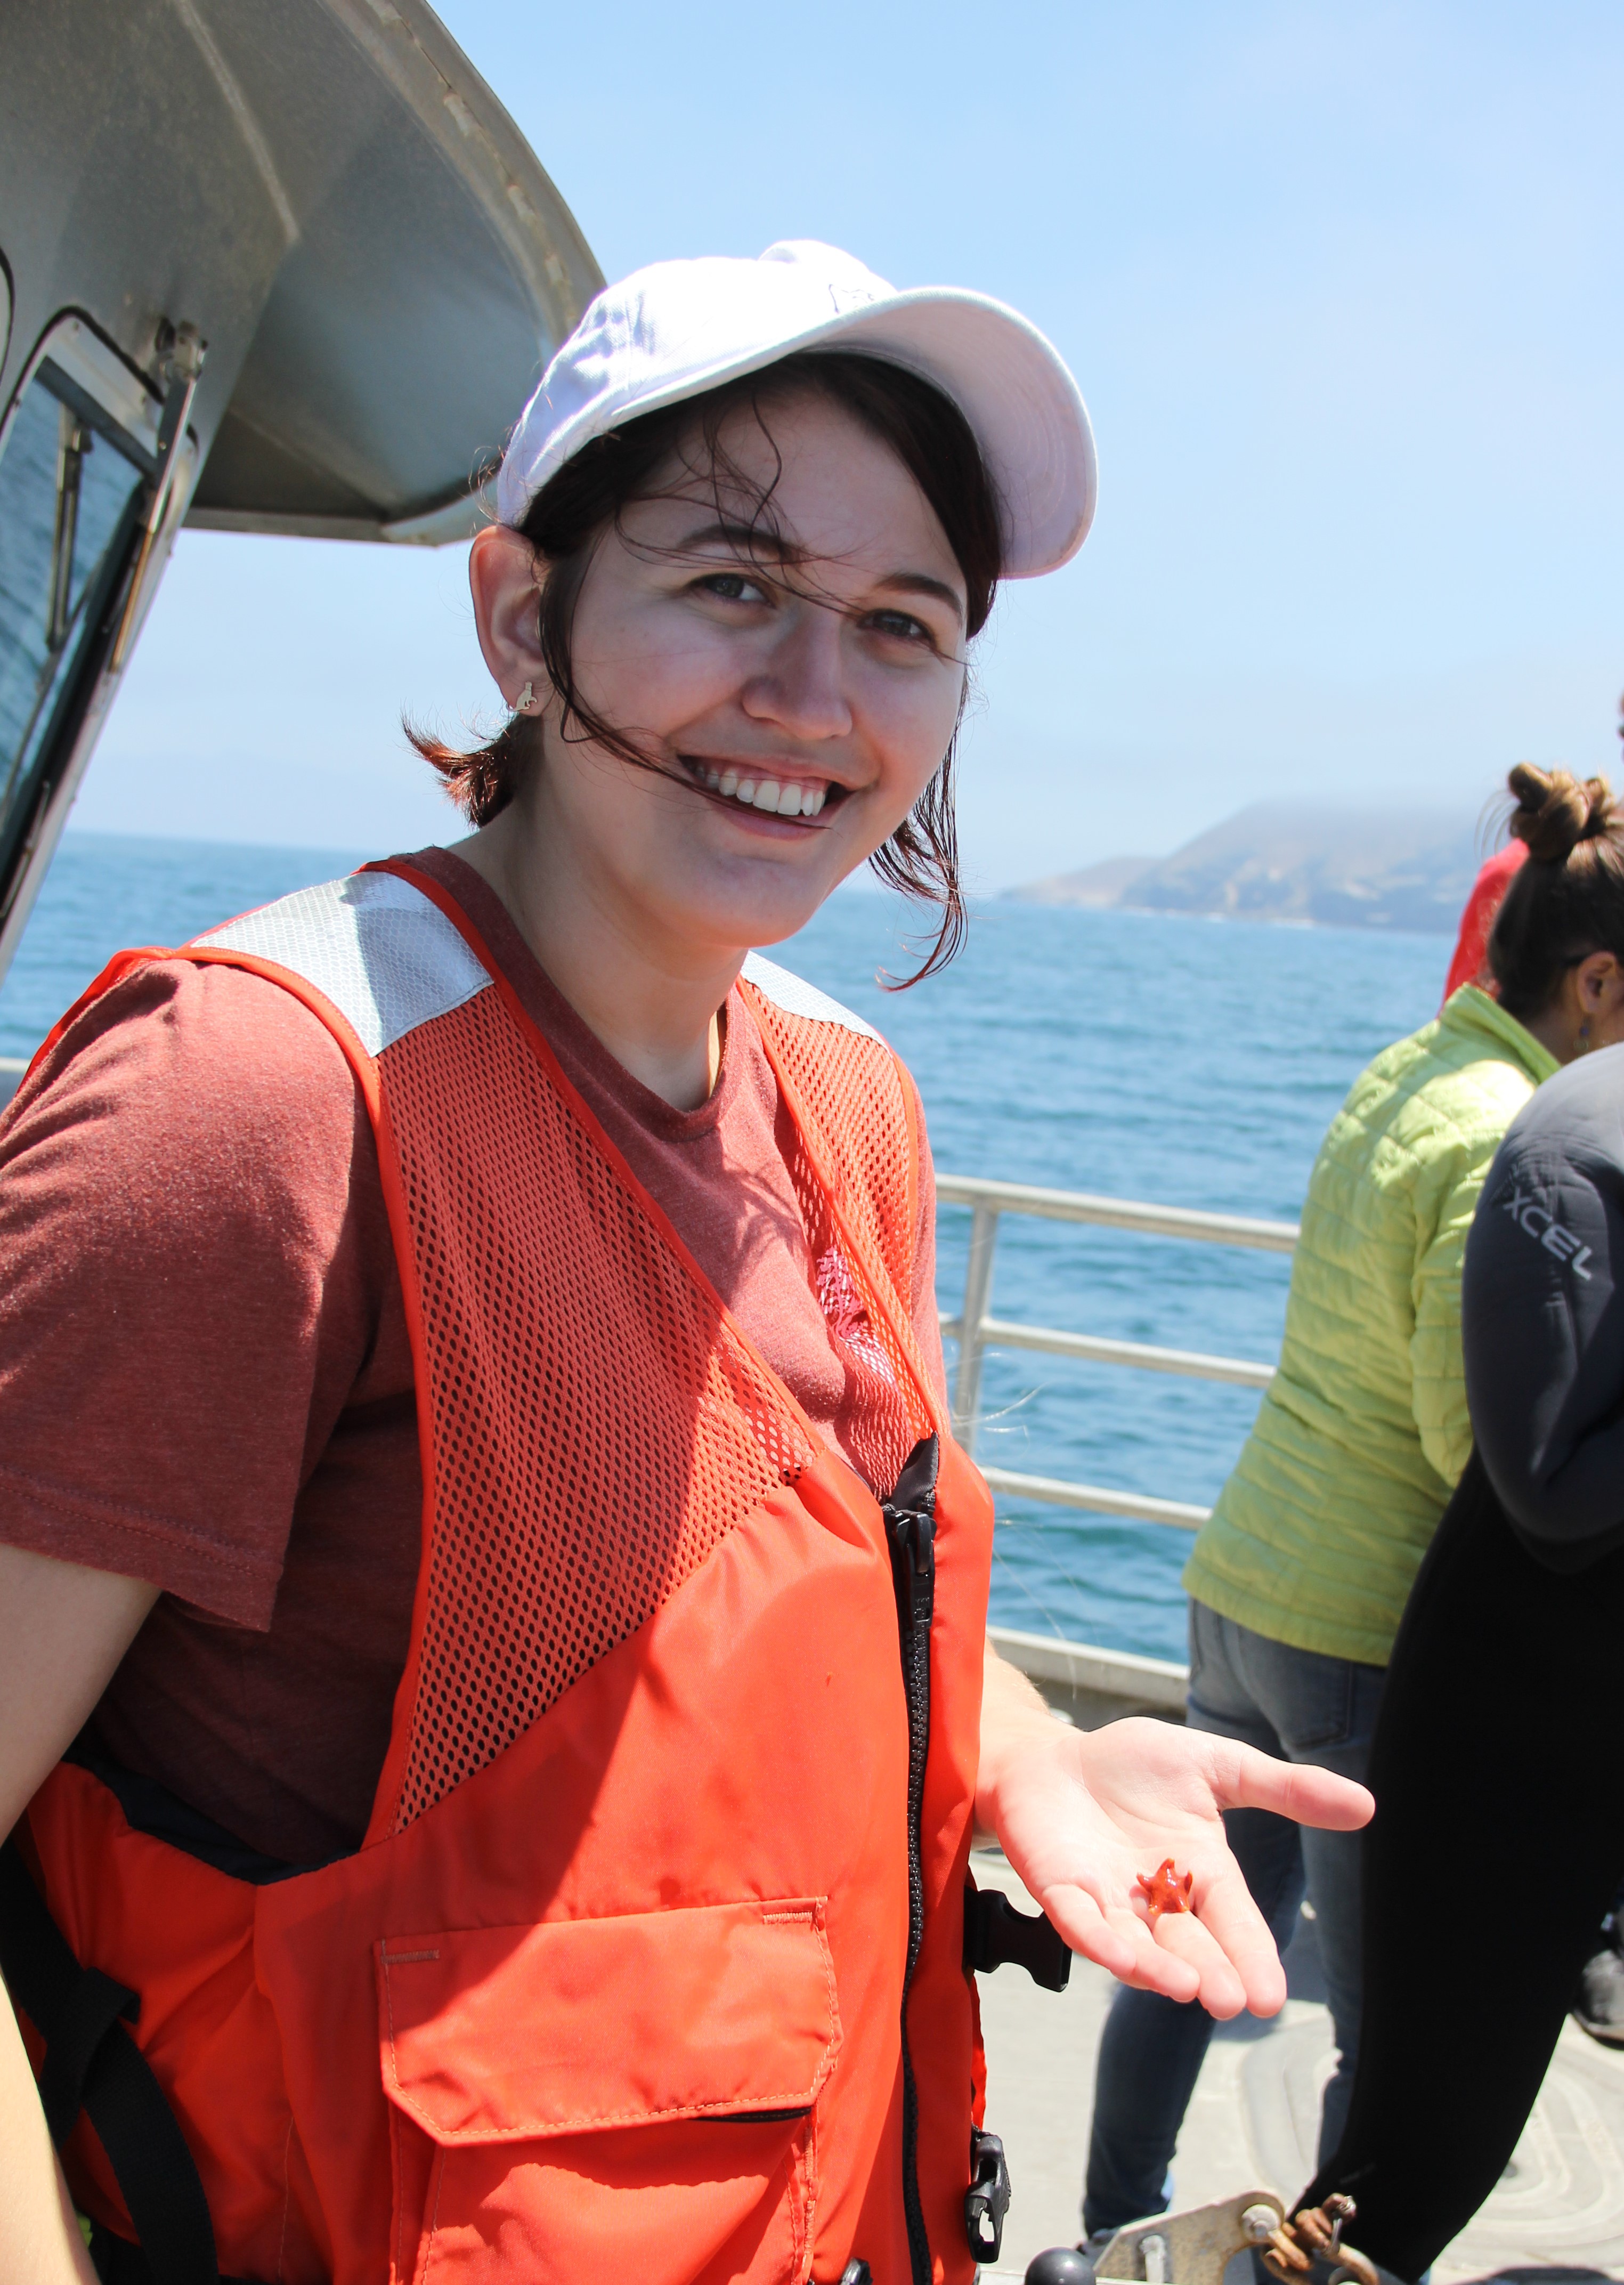 Delaena Stephens, an Educational Partnership Program with Minority Serving Institutions undergraduate scholar, spent the summer compiling an inventory of soniferous, or sound-producing, marine species inhabiting Channel Islands National Marine Sanctuary.